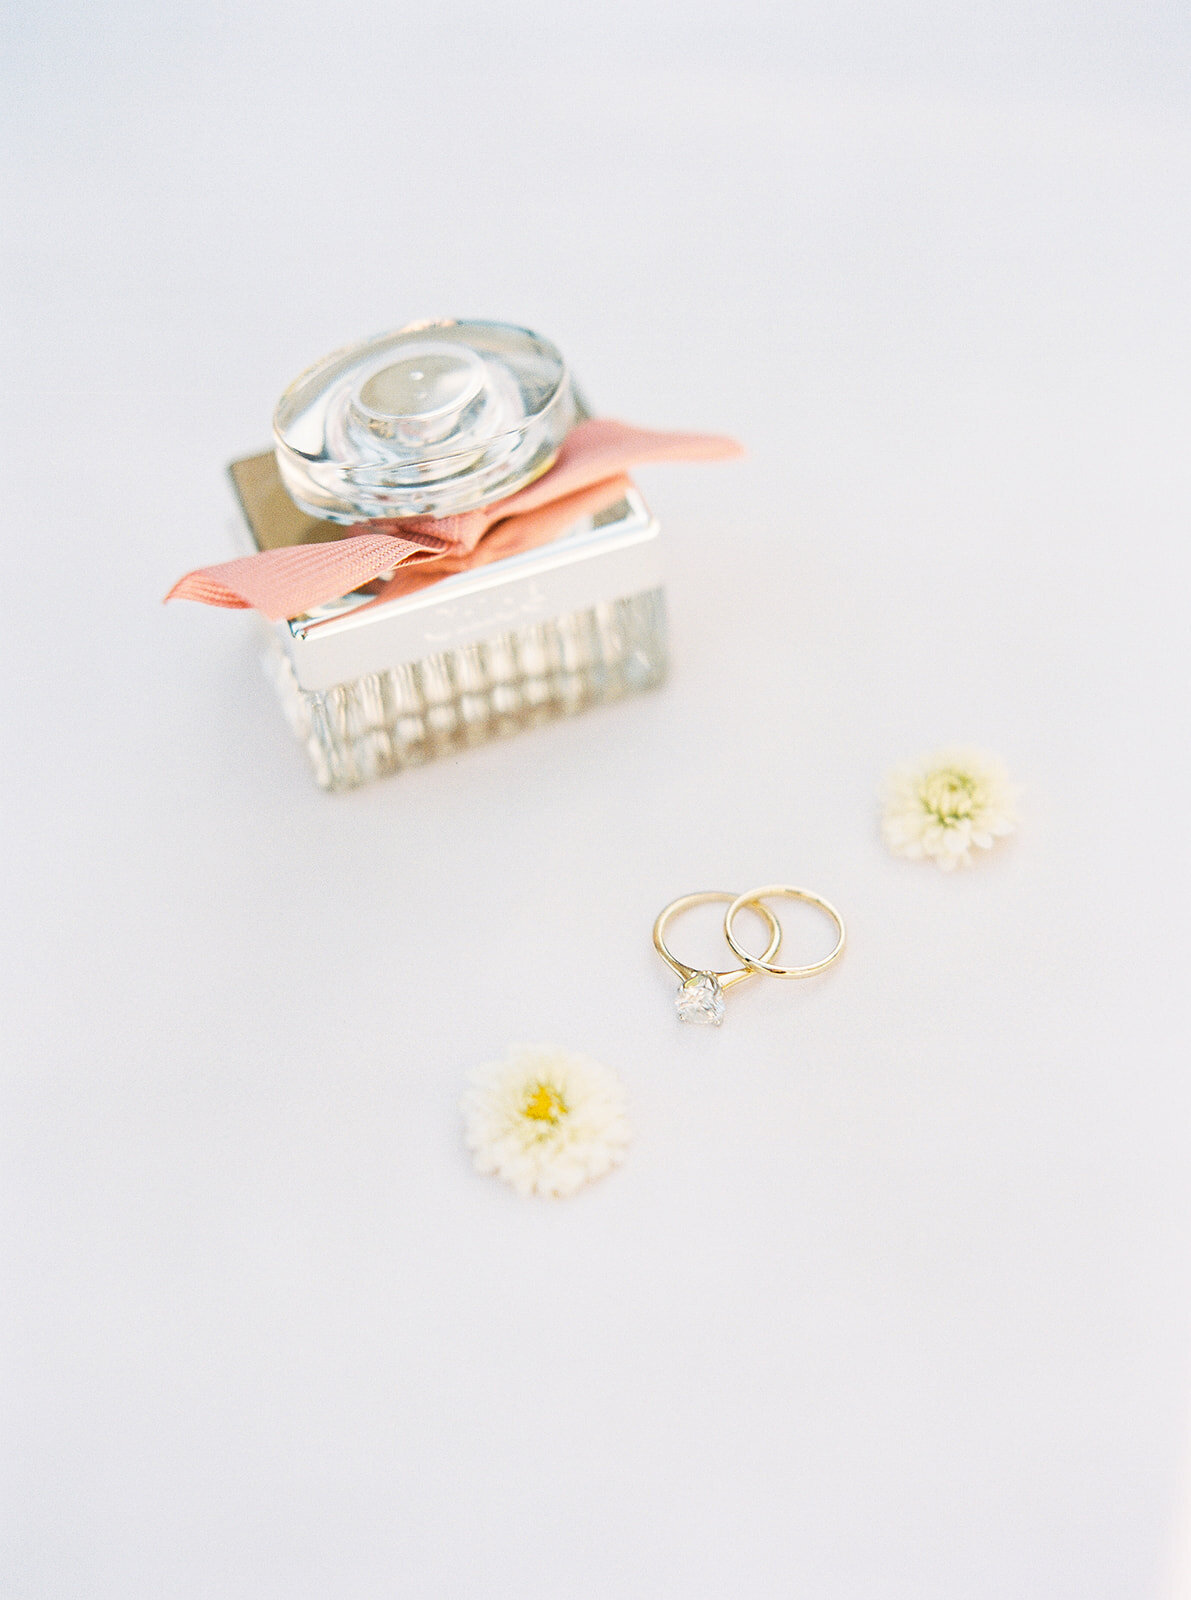 wedding rings with flowers and other bridal accessories